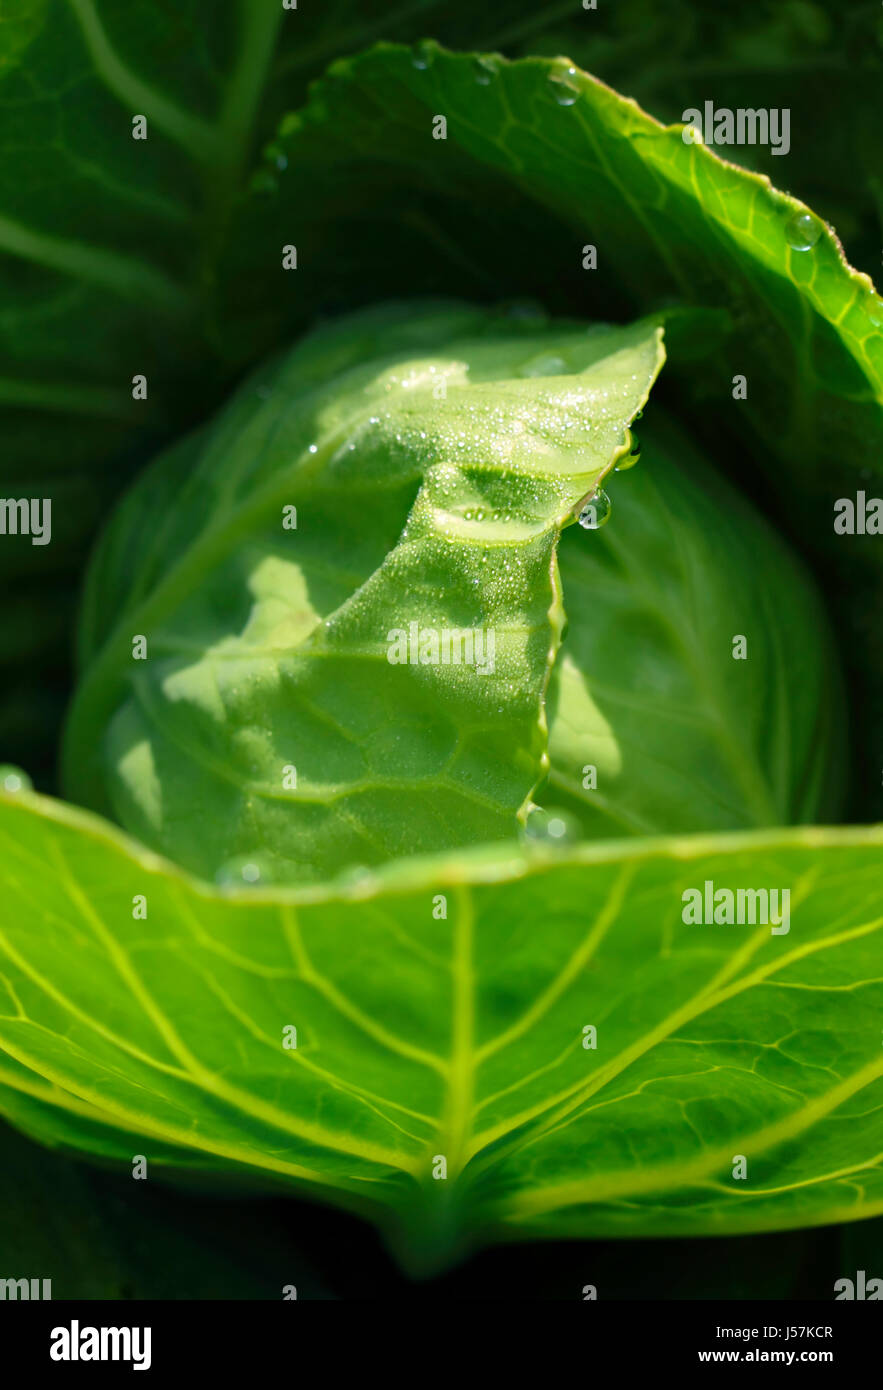 Close up view of a growing green cabbage head Stock Photo